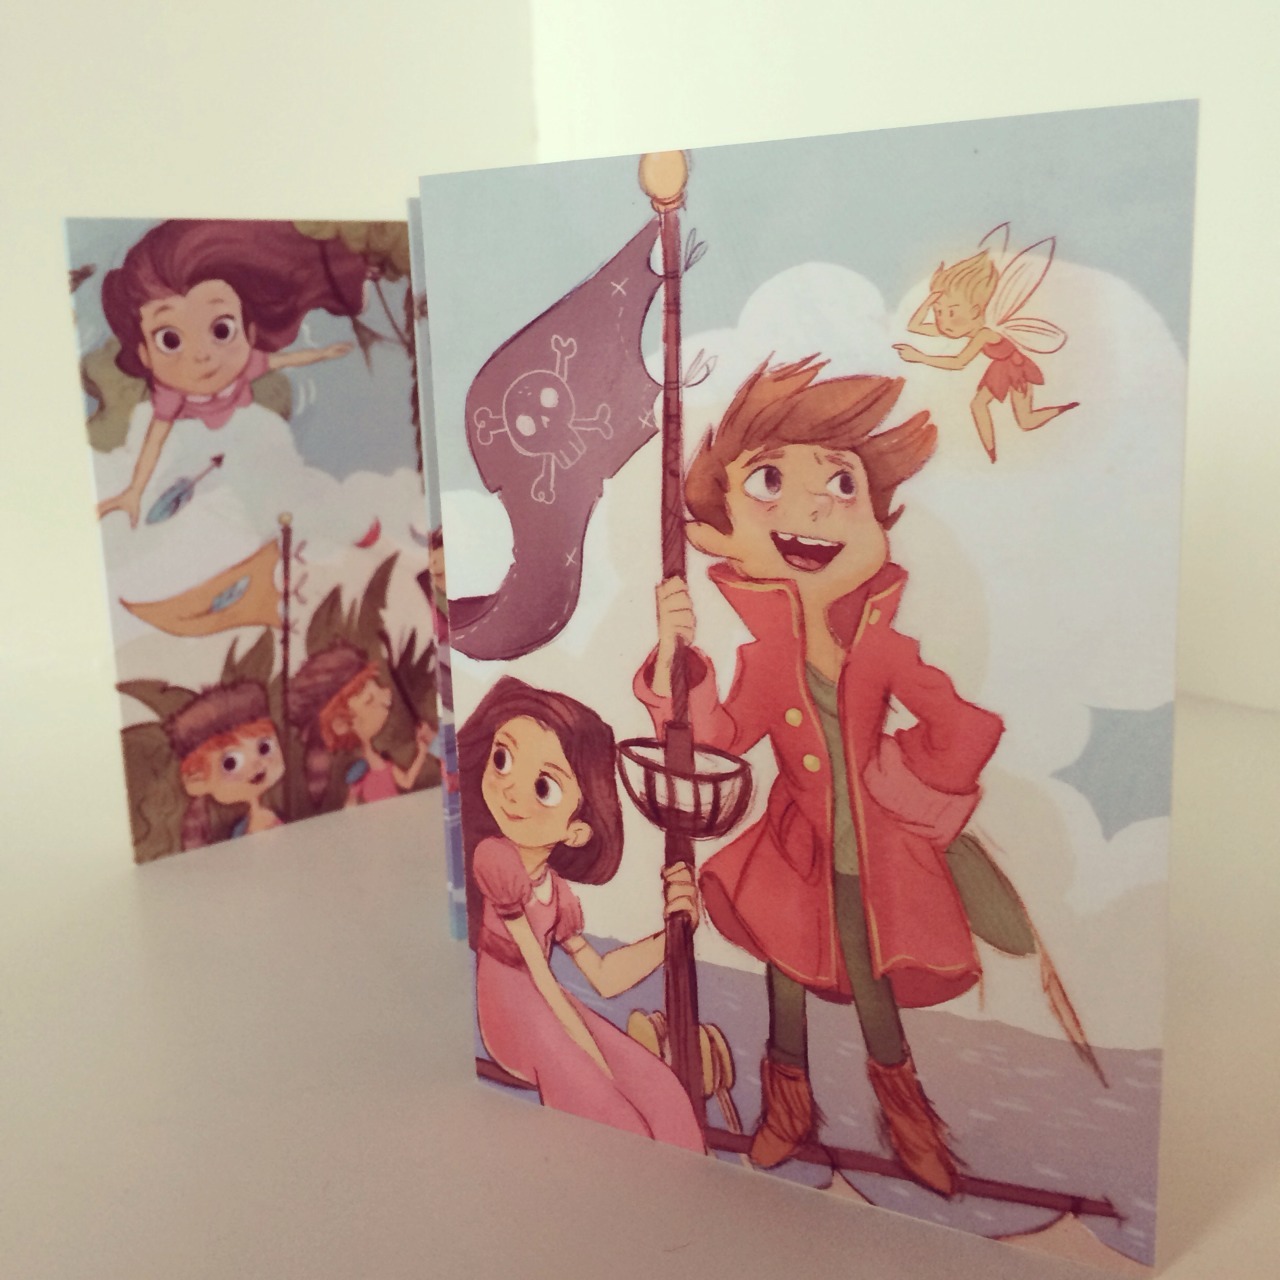 I’m soo excited to finally have this printed! This is the first run of our Neverland inspired accordion book. We’ll have it for sale at WonderCon this weekend and on our website. If you’re at Wondercon stop by and say hi! I promise to be nice :)...